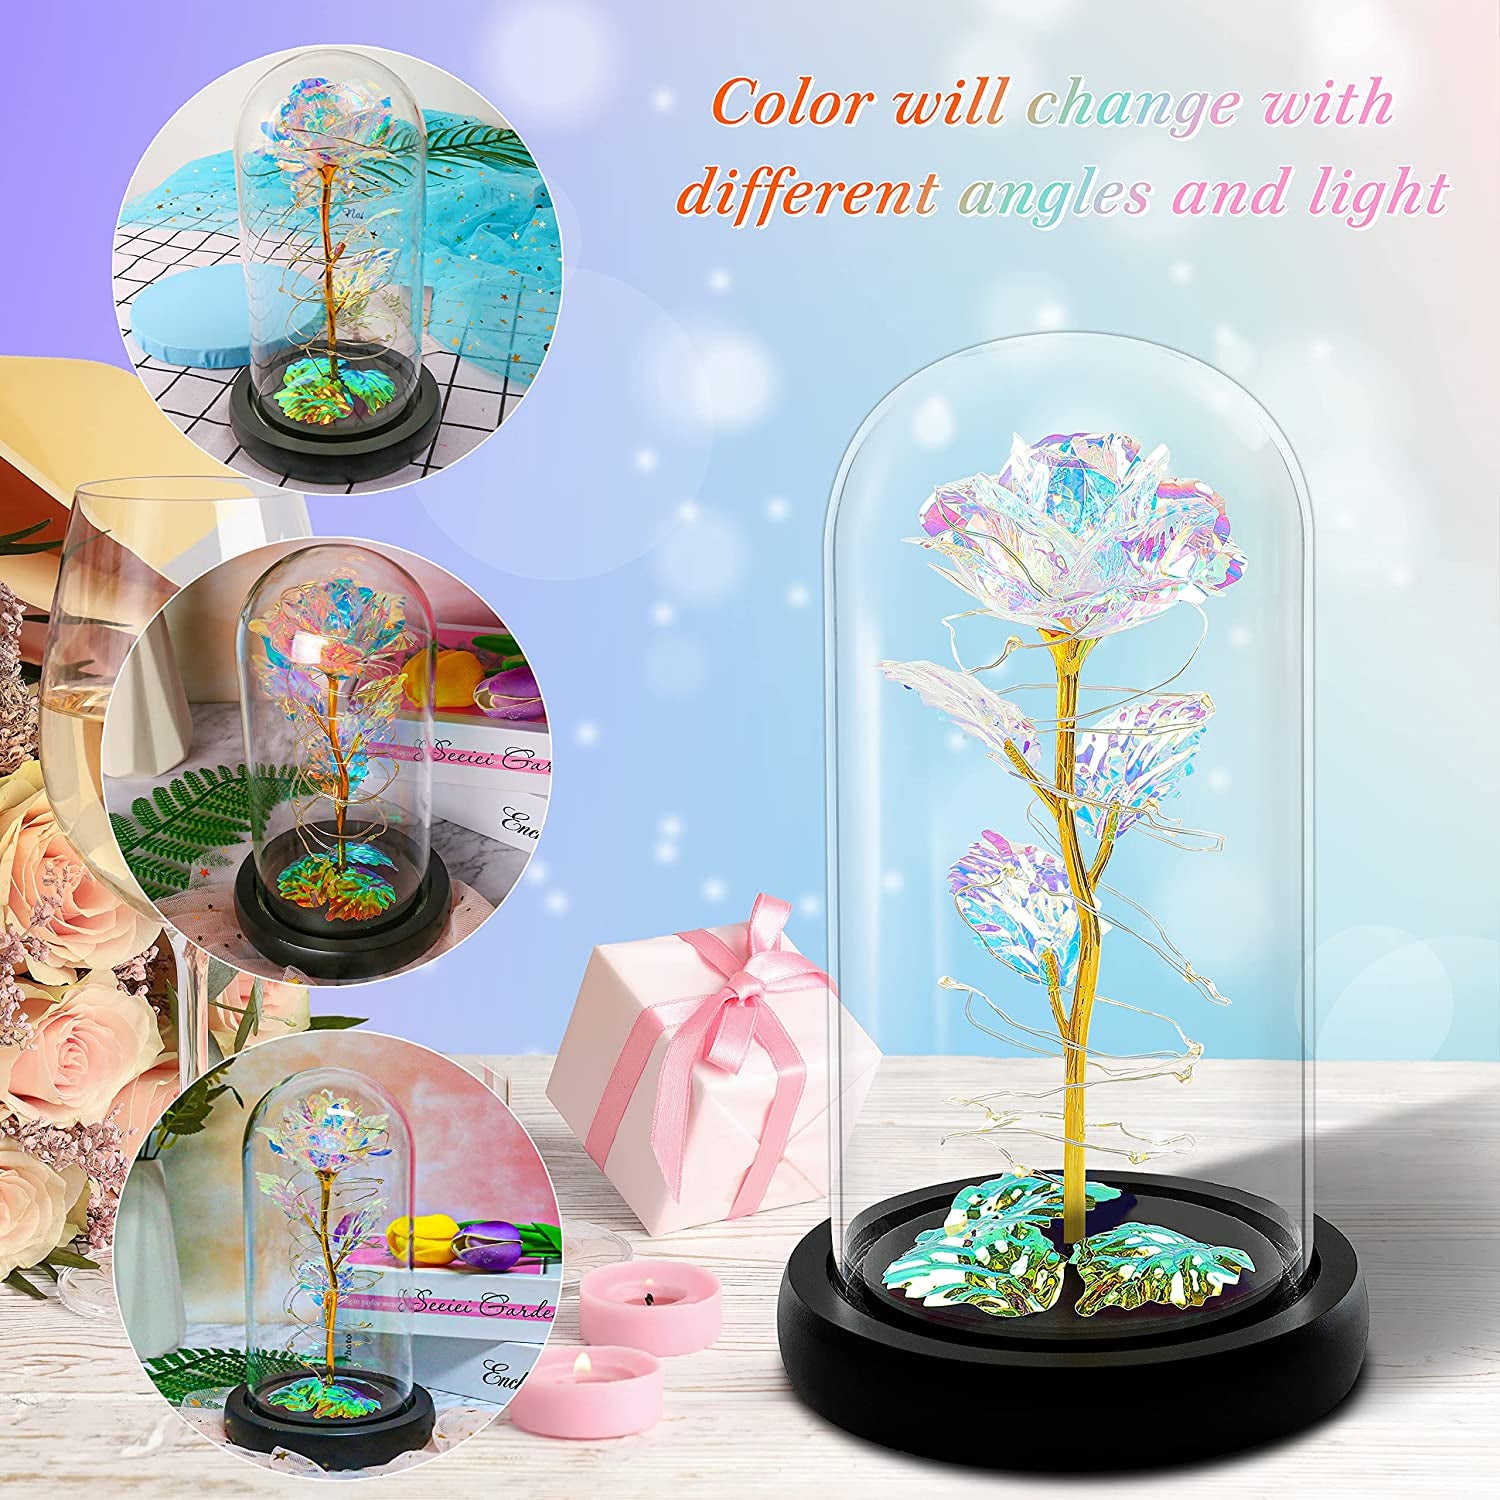 Rose Flower Gifts for Women,Birthday Gifts for Women,Womens Gifts for Christmas,Mom Gift for Xmas,Colorful Rainbow Artificial Flower Rose Light up Rose in a Glass Dome,Flower Gifts for Her,Anniversary